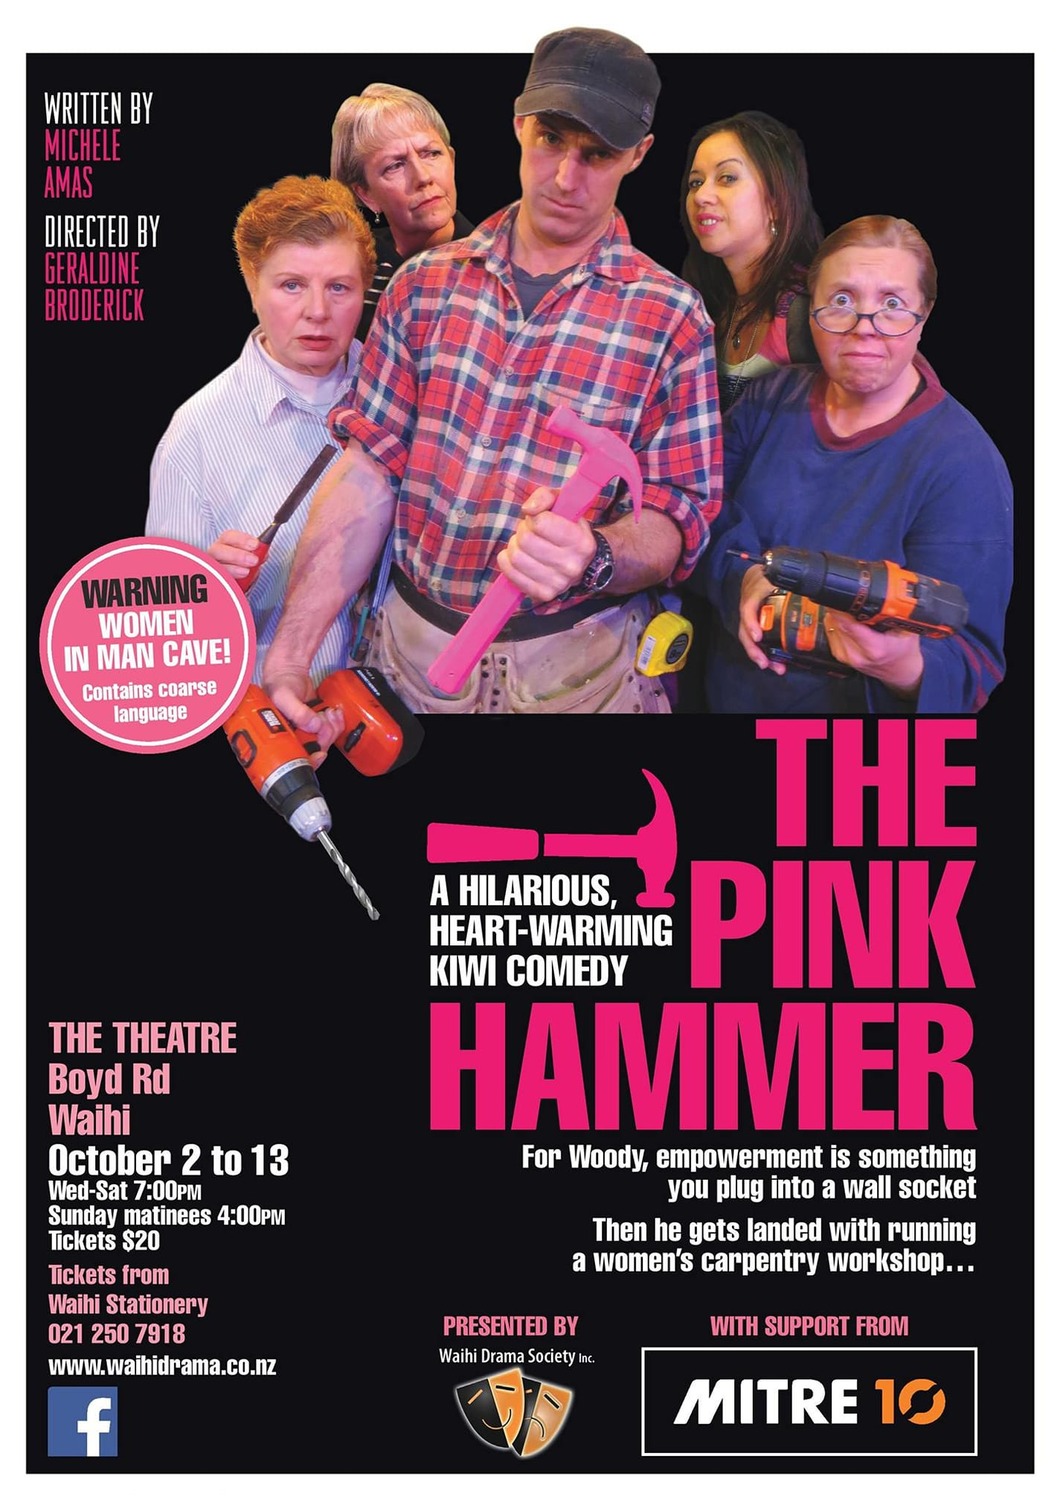 The Pink Hammer